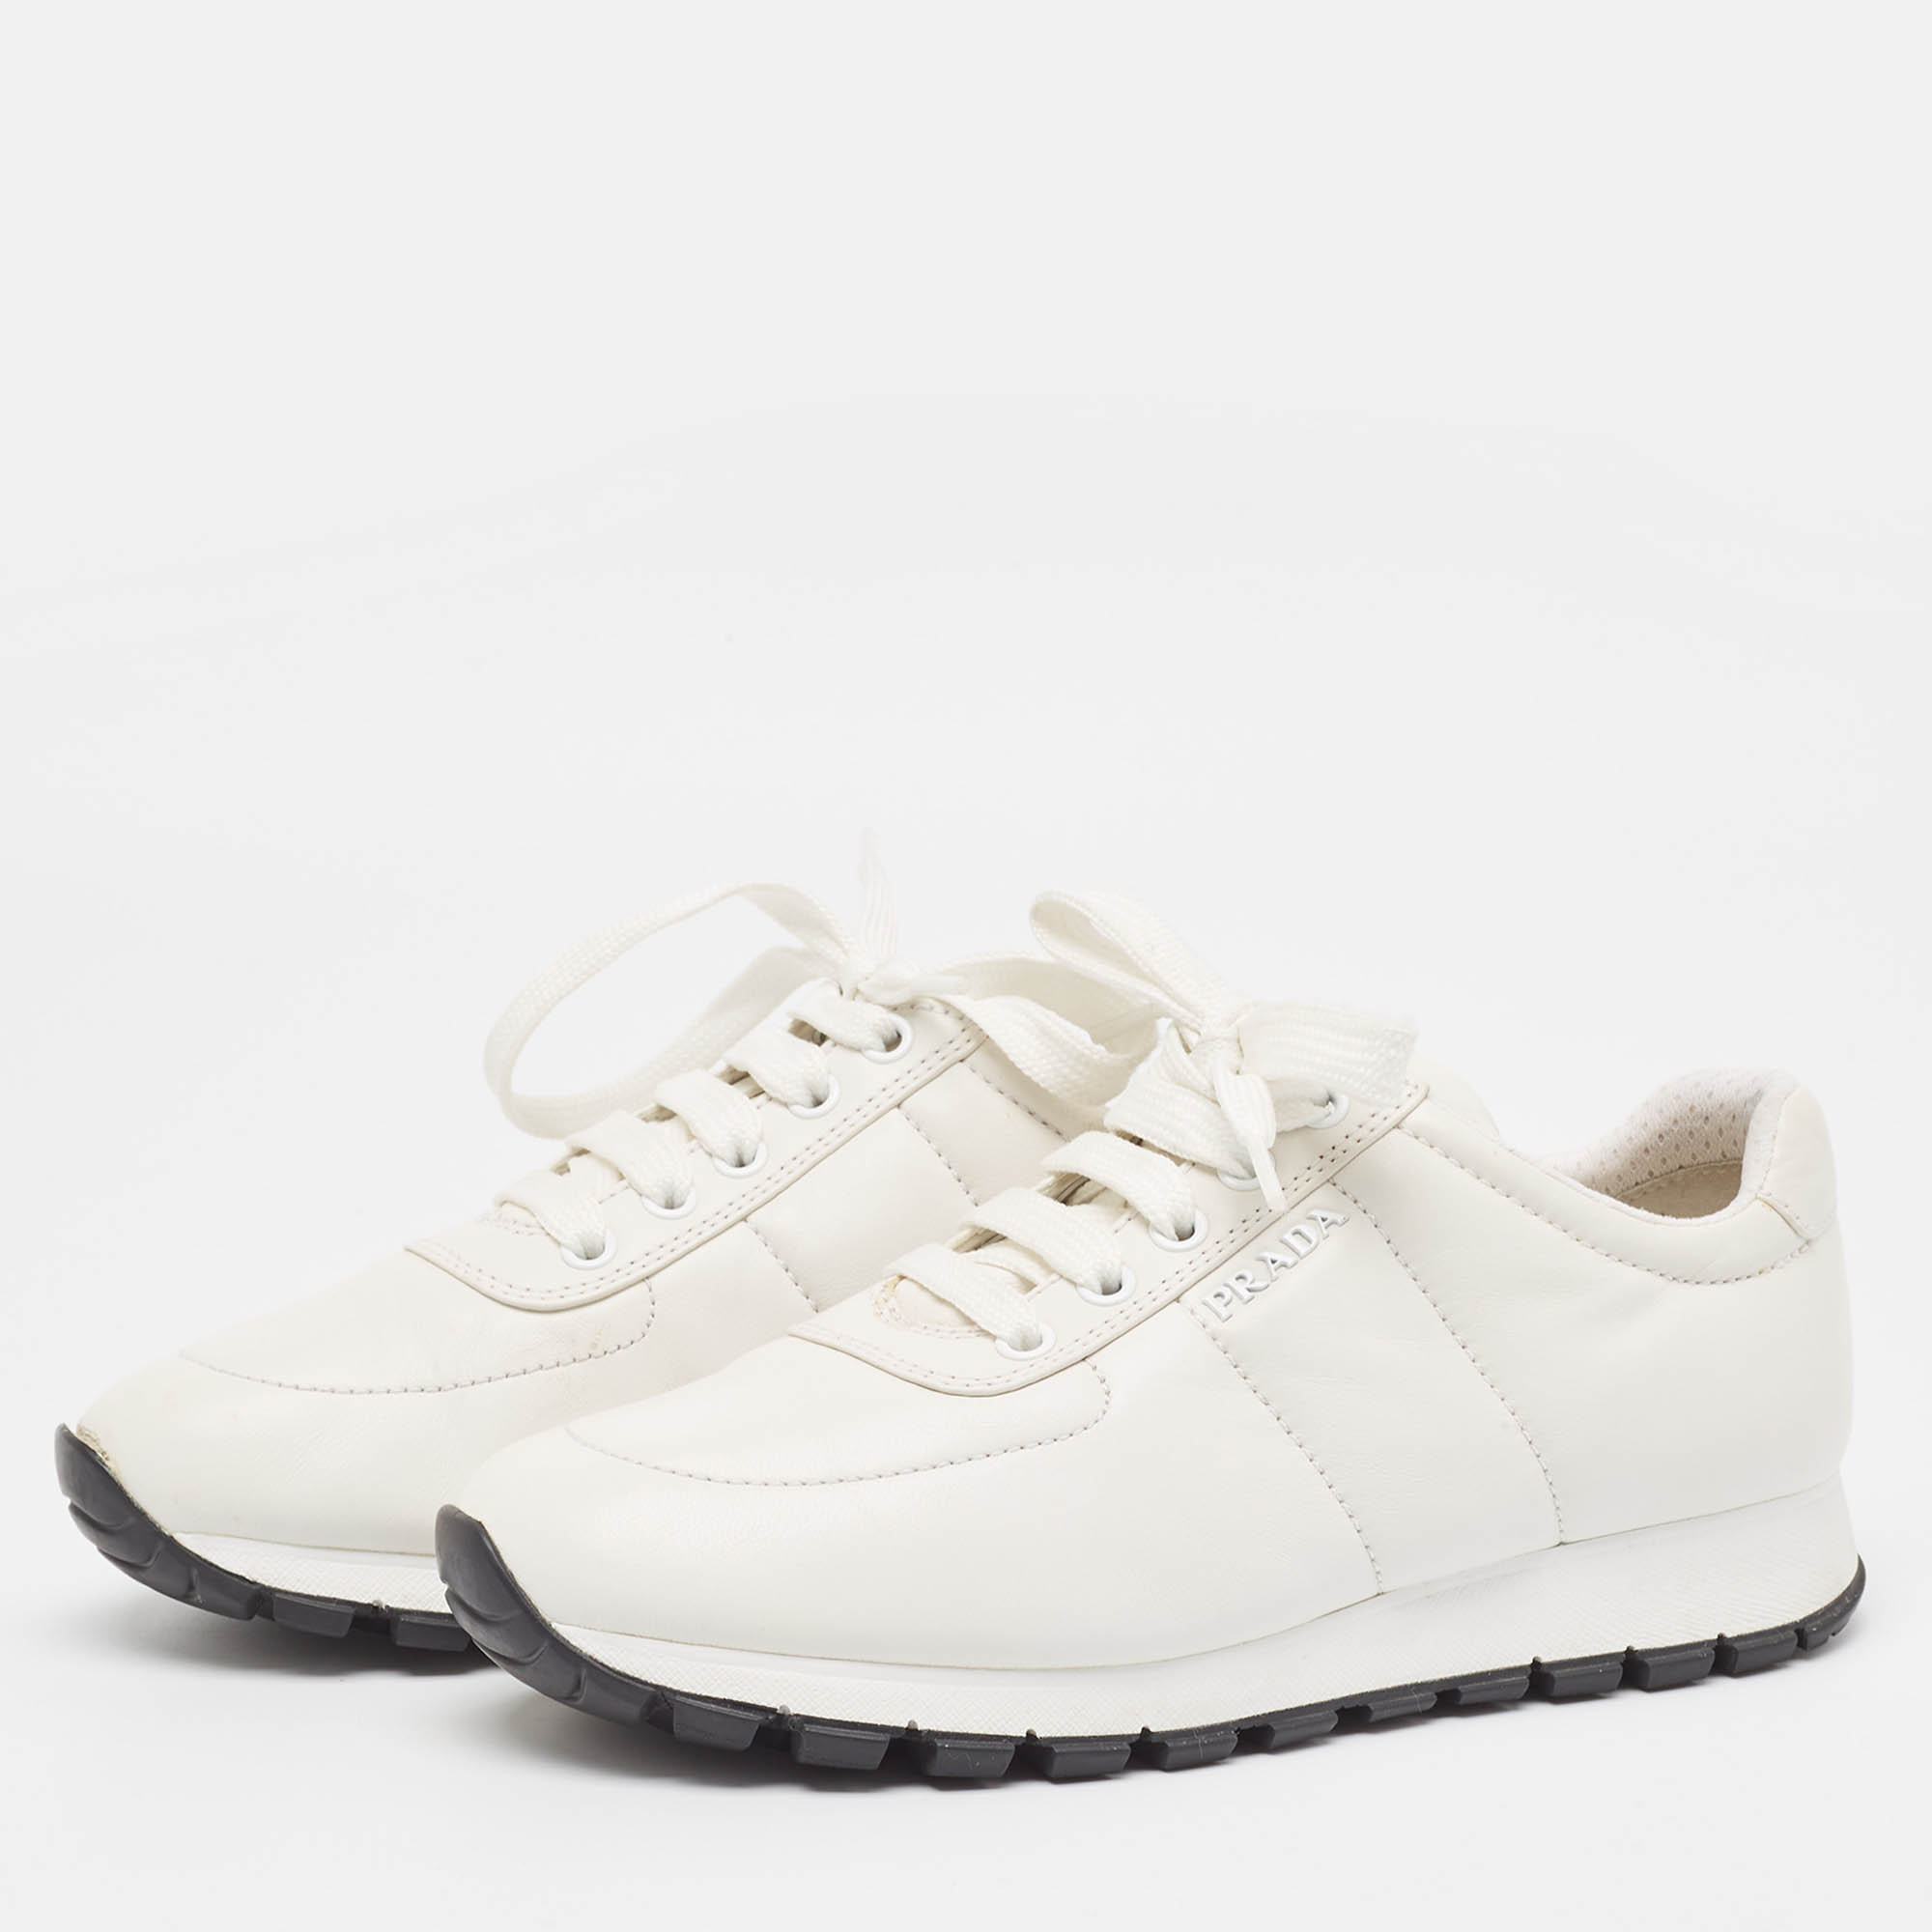 

Prada White Leather Low Top Sneakers Size